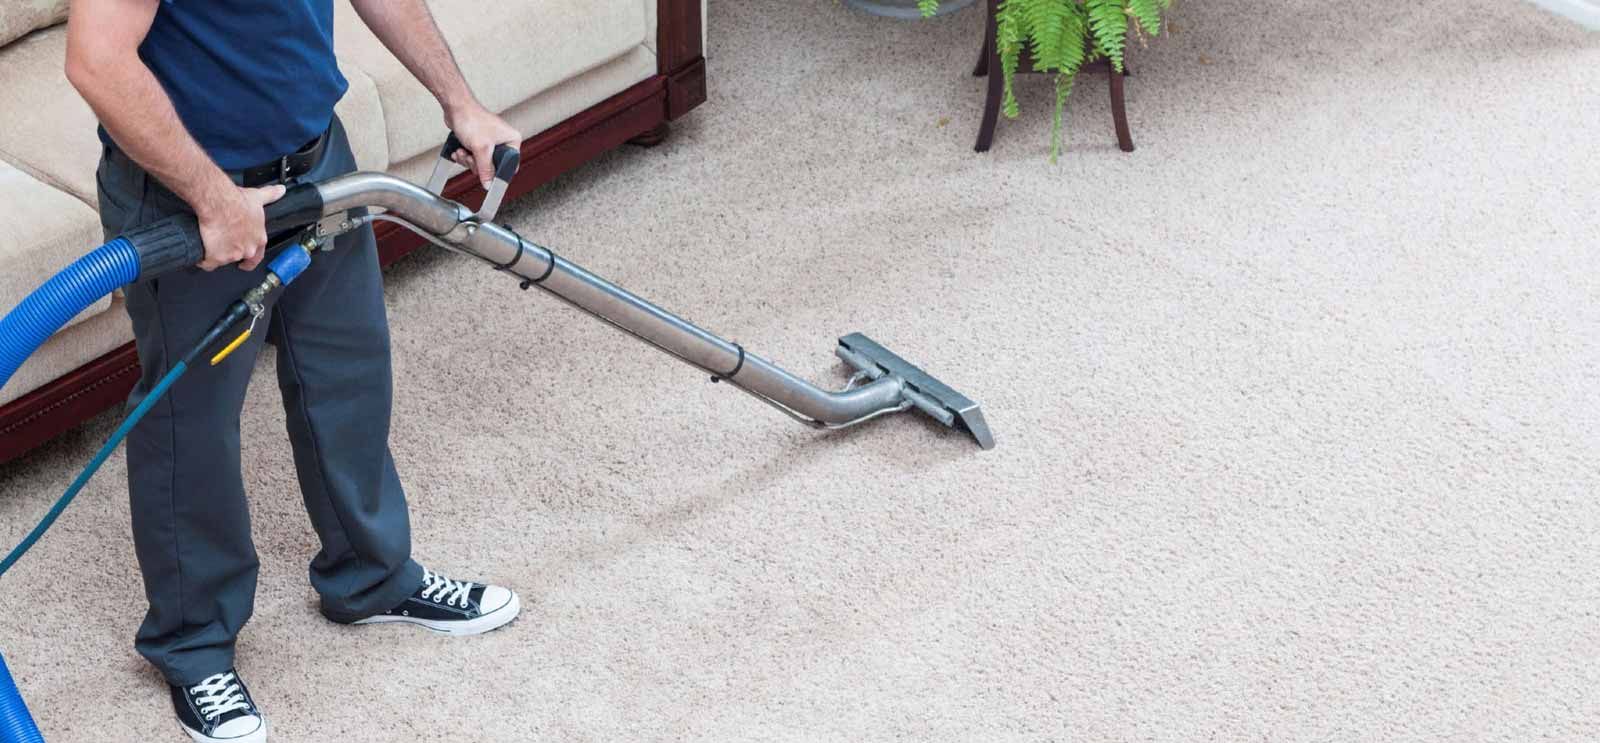 https://www.blacktiecarpetcare.com/wp-content/themes/yootheme/cache/carpet-cleaning-cypress-hero-1-7d796f37.jpeg